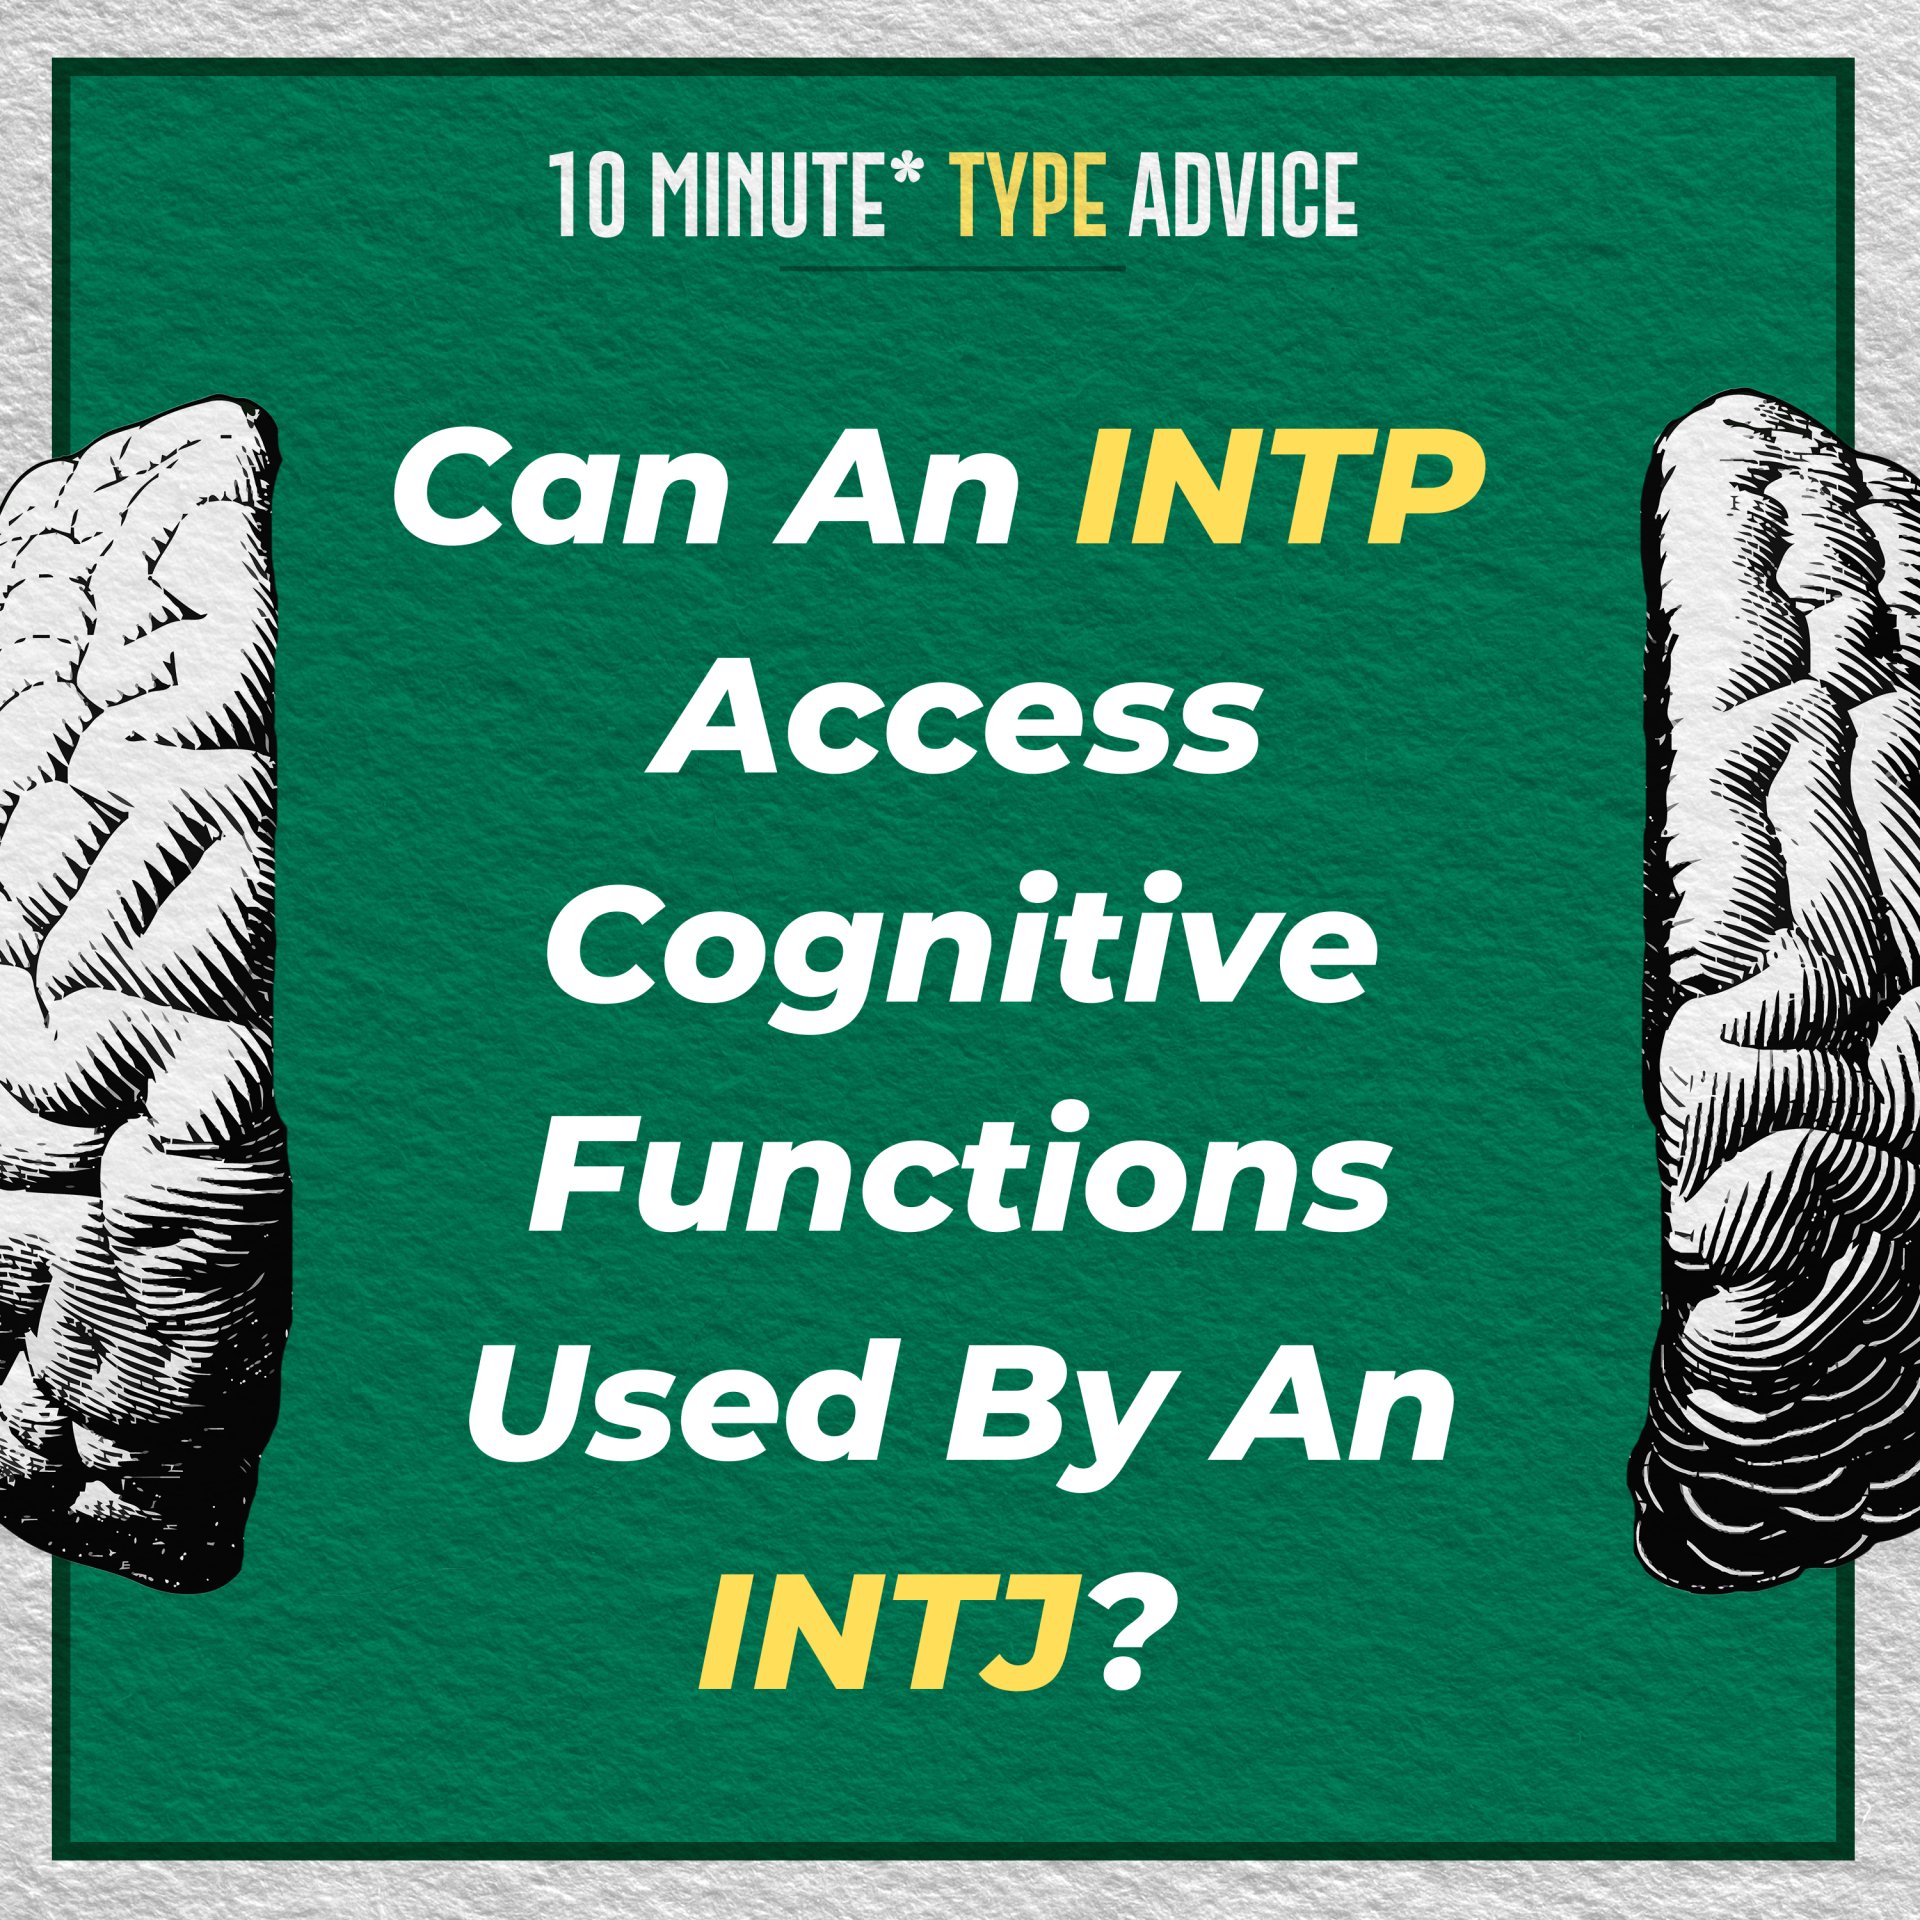 Can An INTP Access Cognitive Functions Used By An INTJ? | 10 Min Type Advice | S02:E01